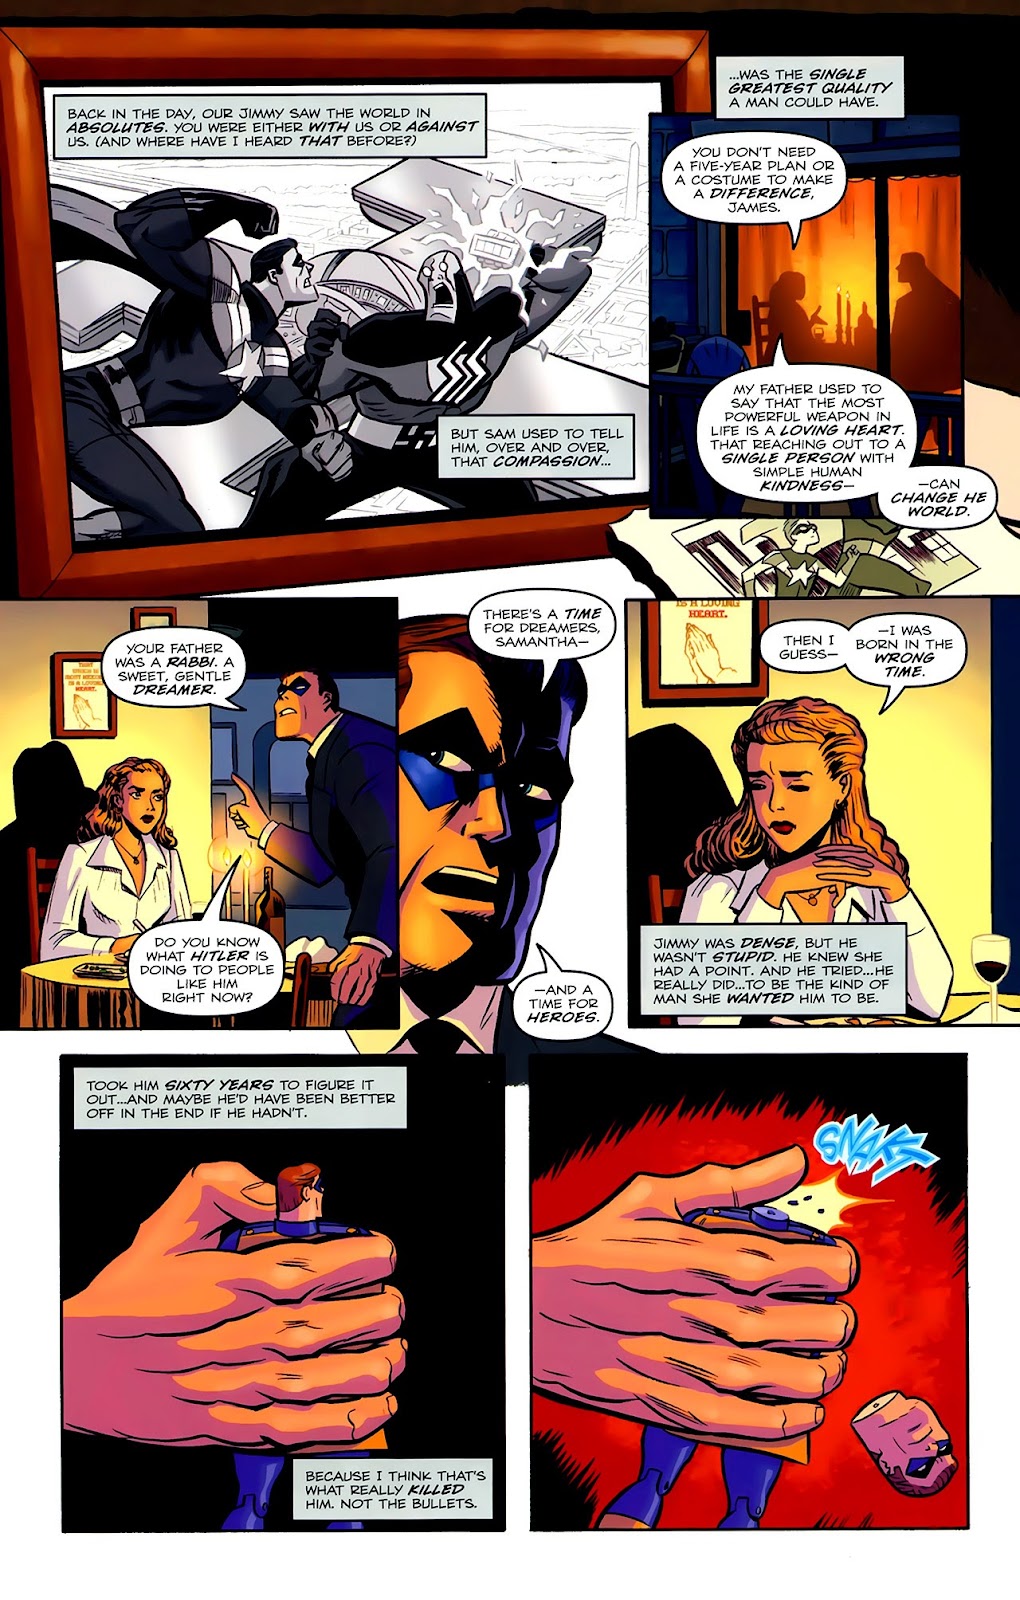 The Life and Times of Savior 28 issue 1 - Page 9